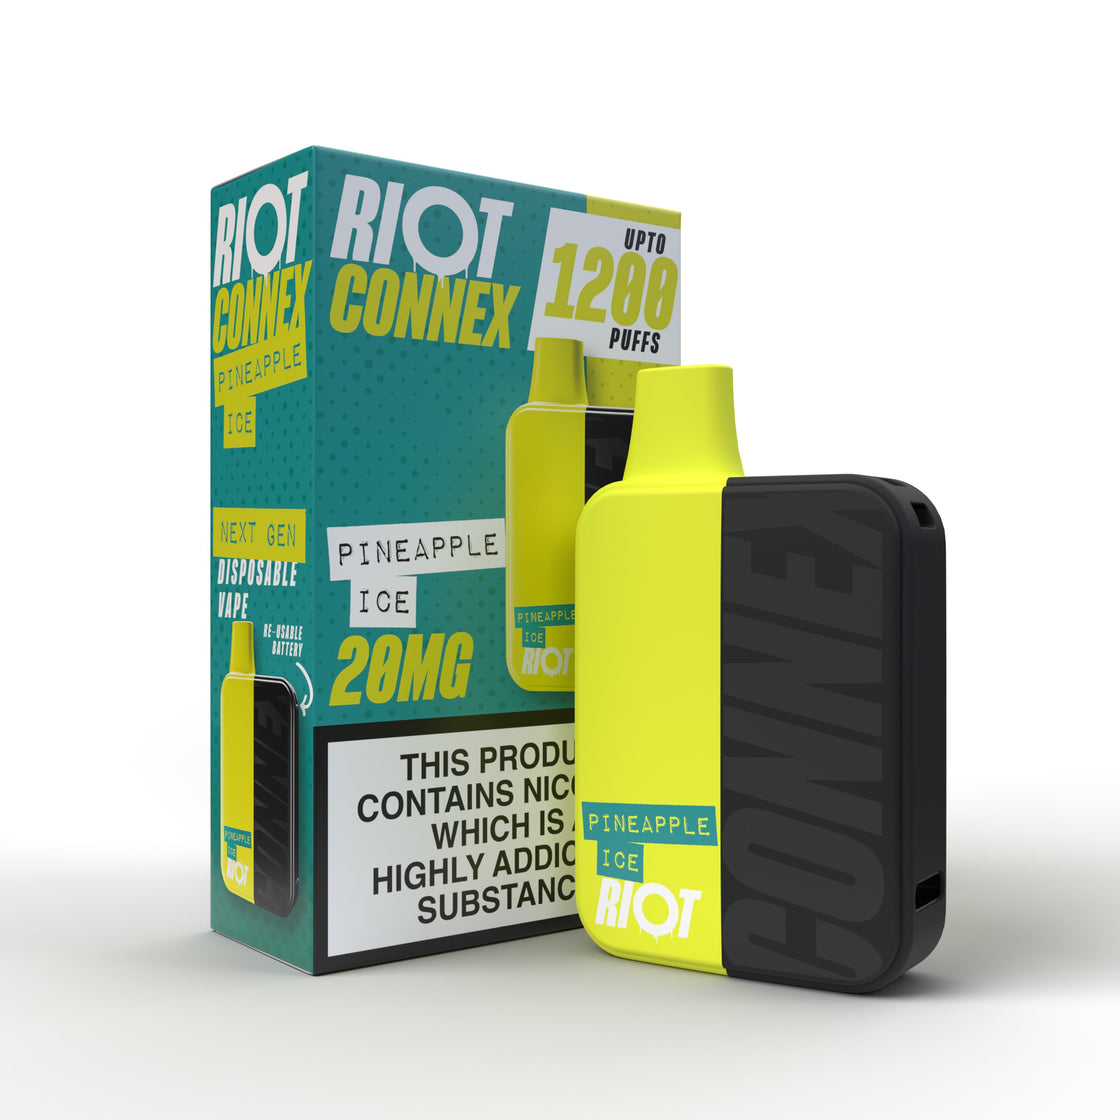 PINEAPPLE ICE - RIOT CONNEX - DISPOSABLE POD SYSTEM KIT - 1200 PUFFS BY RIOT SQUAD - Vapeslough